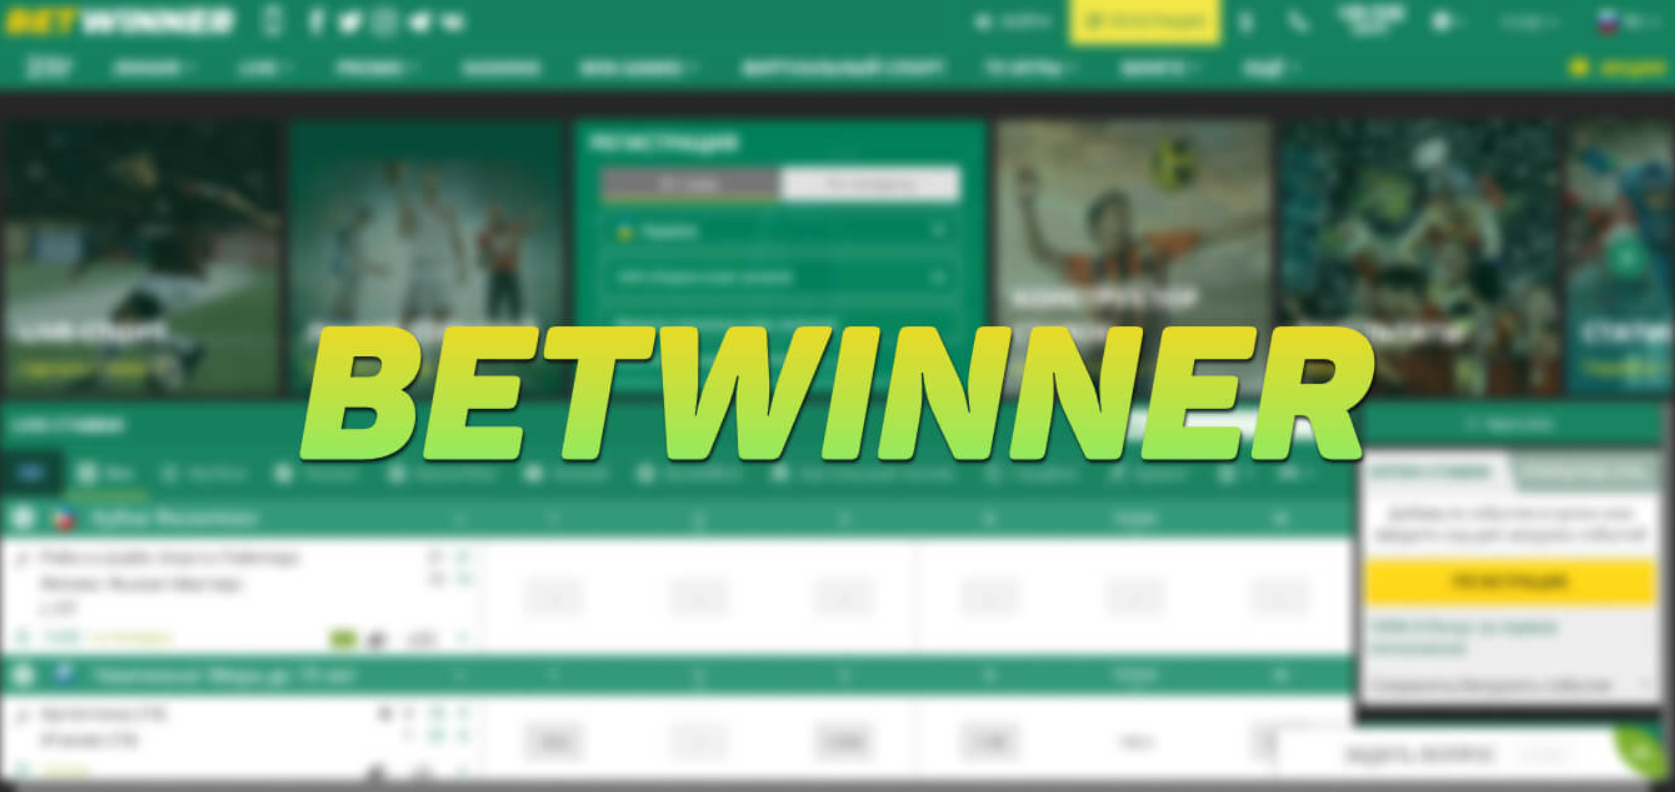 registration on the official website of the BetWinner company